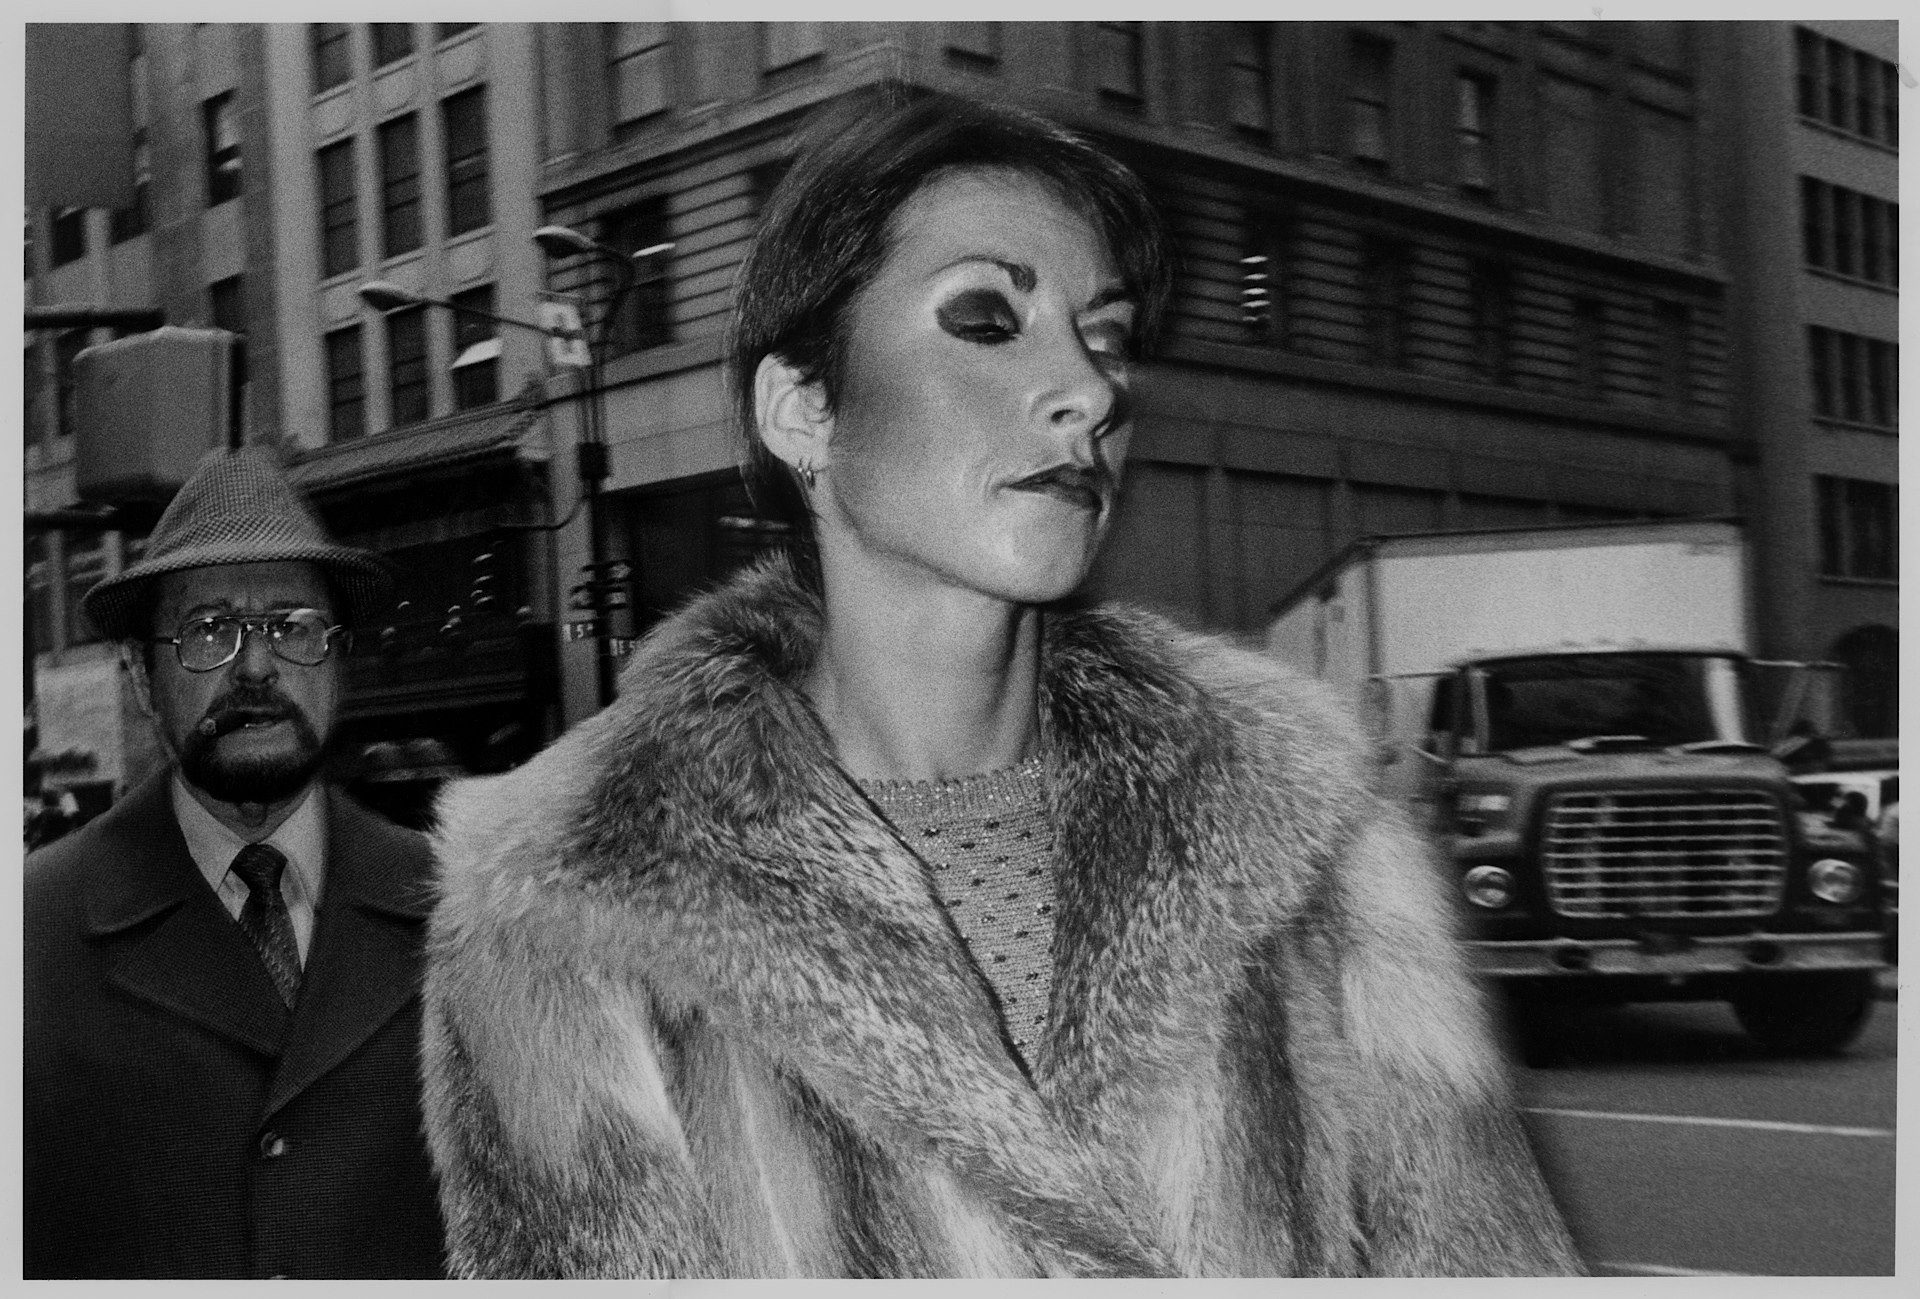 cigar, woman, truck, 5th ave., nyc, c. 1983